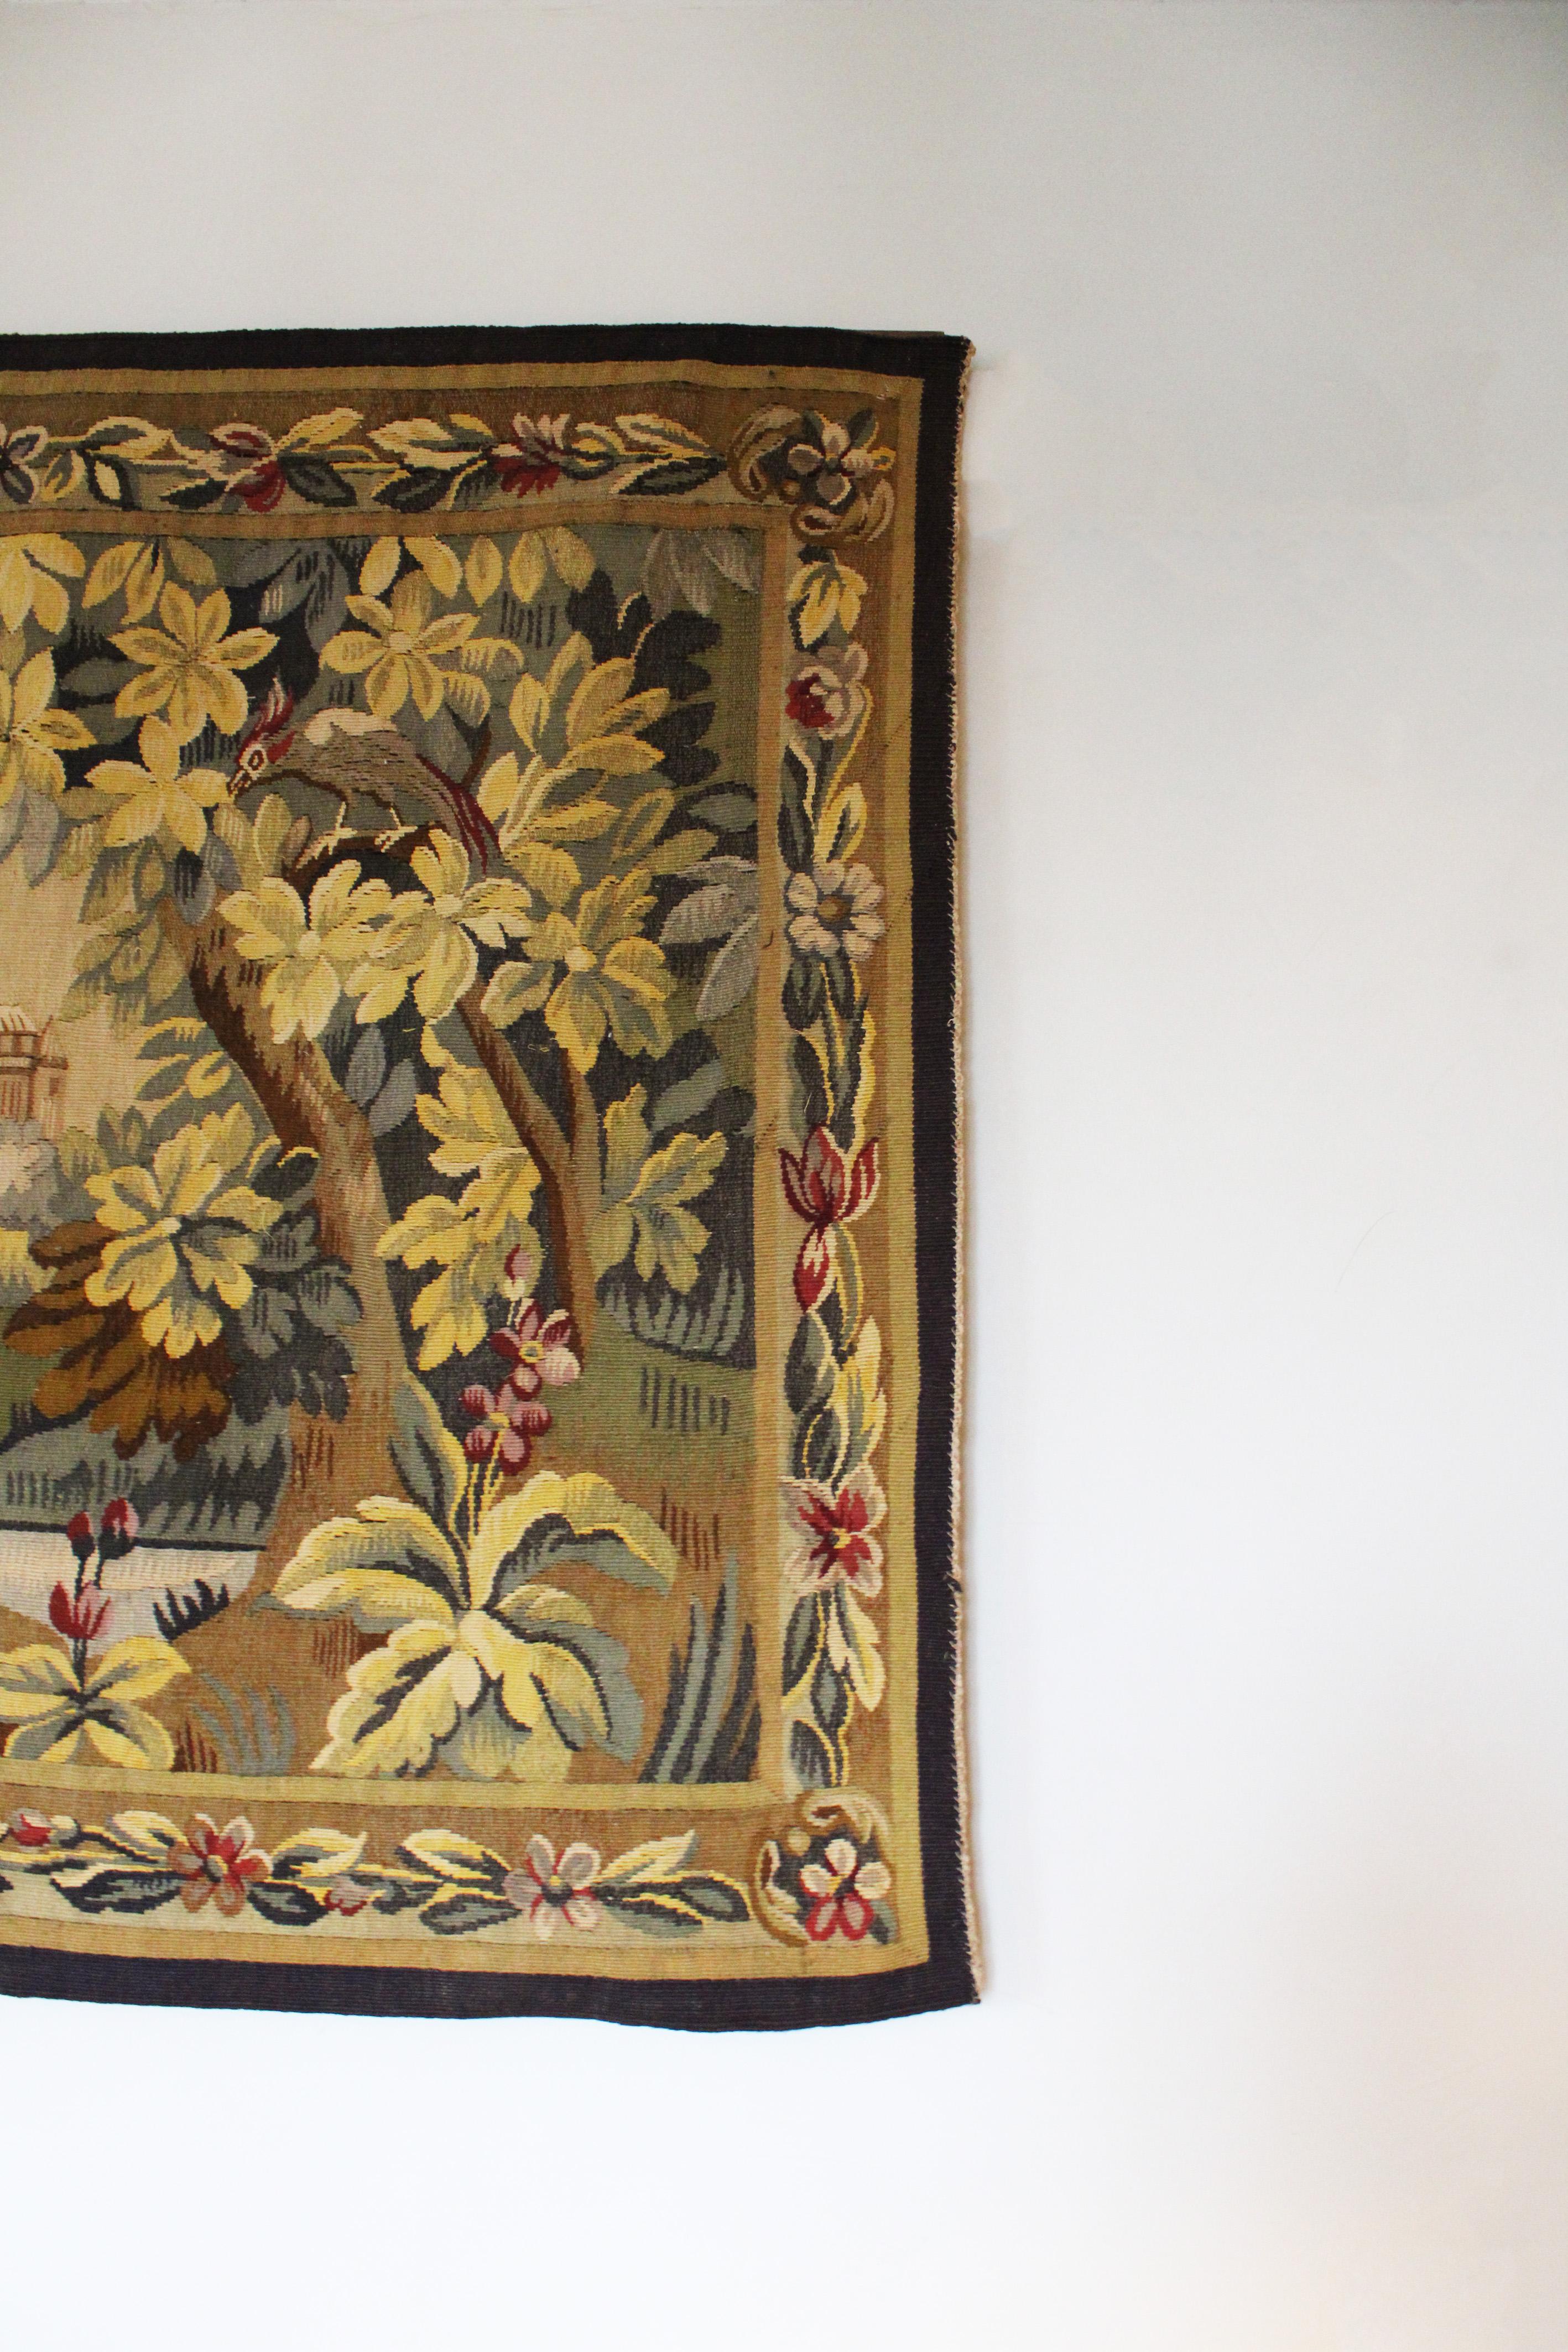 Immerse yourself in the serene beauty of the French countryside with our exquisite 19th Century Verdure Tapestry, depicting a bucolic landscape complete with a river, castle, birds, and blooming flowers. Crafted by Aubusson in France, this wool